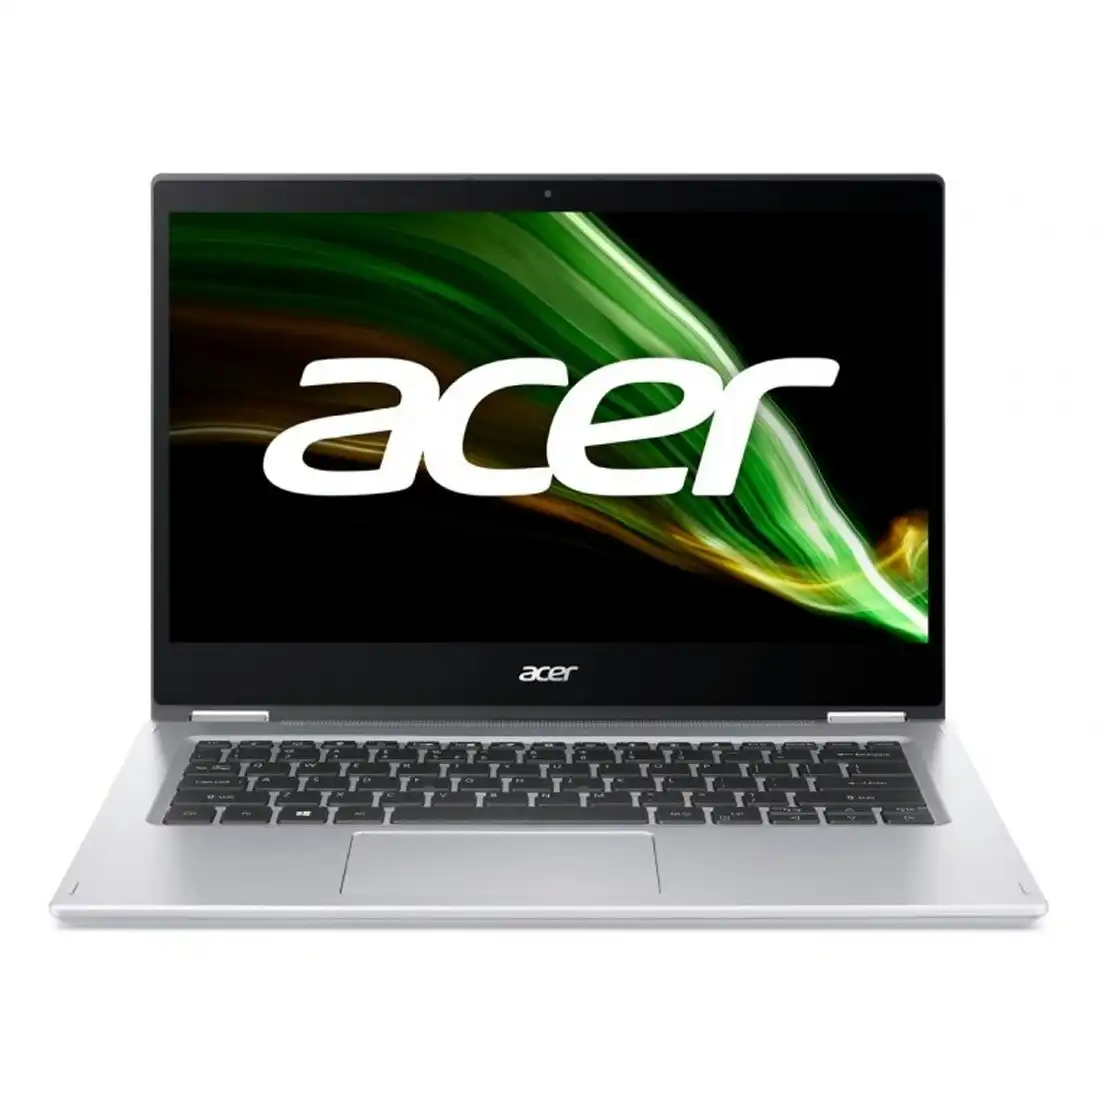 Acer Spin 1 (14'', Pentium N6000, 256GB/8GB, NX.ABGSA.006) 2 in 1 Notebook Silver [Refurbished] - As New